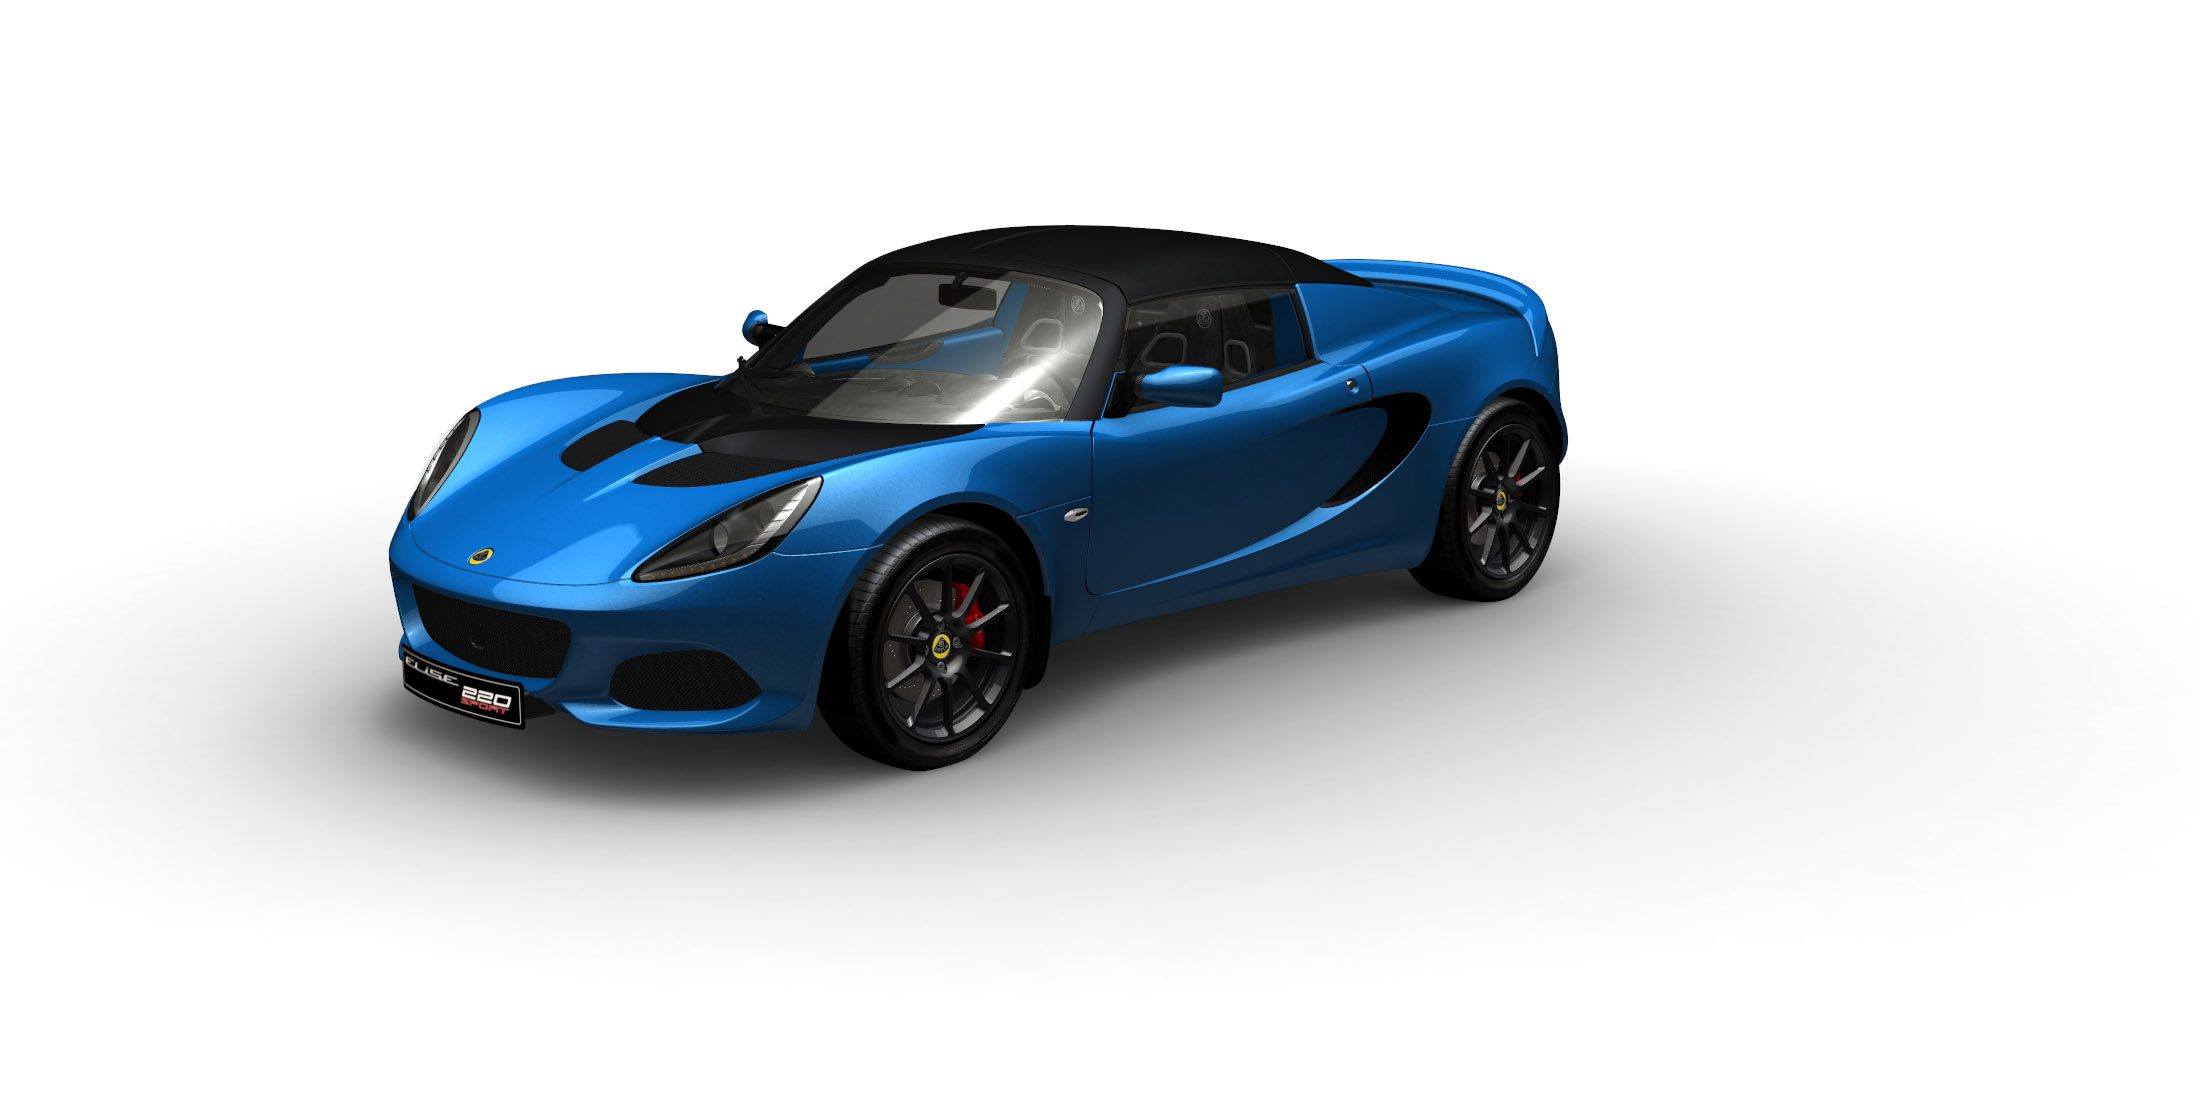 The Lotus Elise Sport 220 Lotus Cars For The Drivers